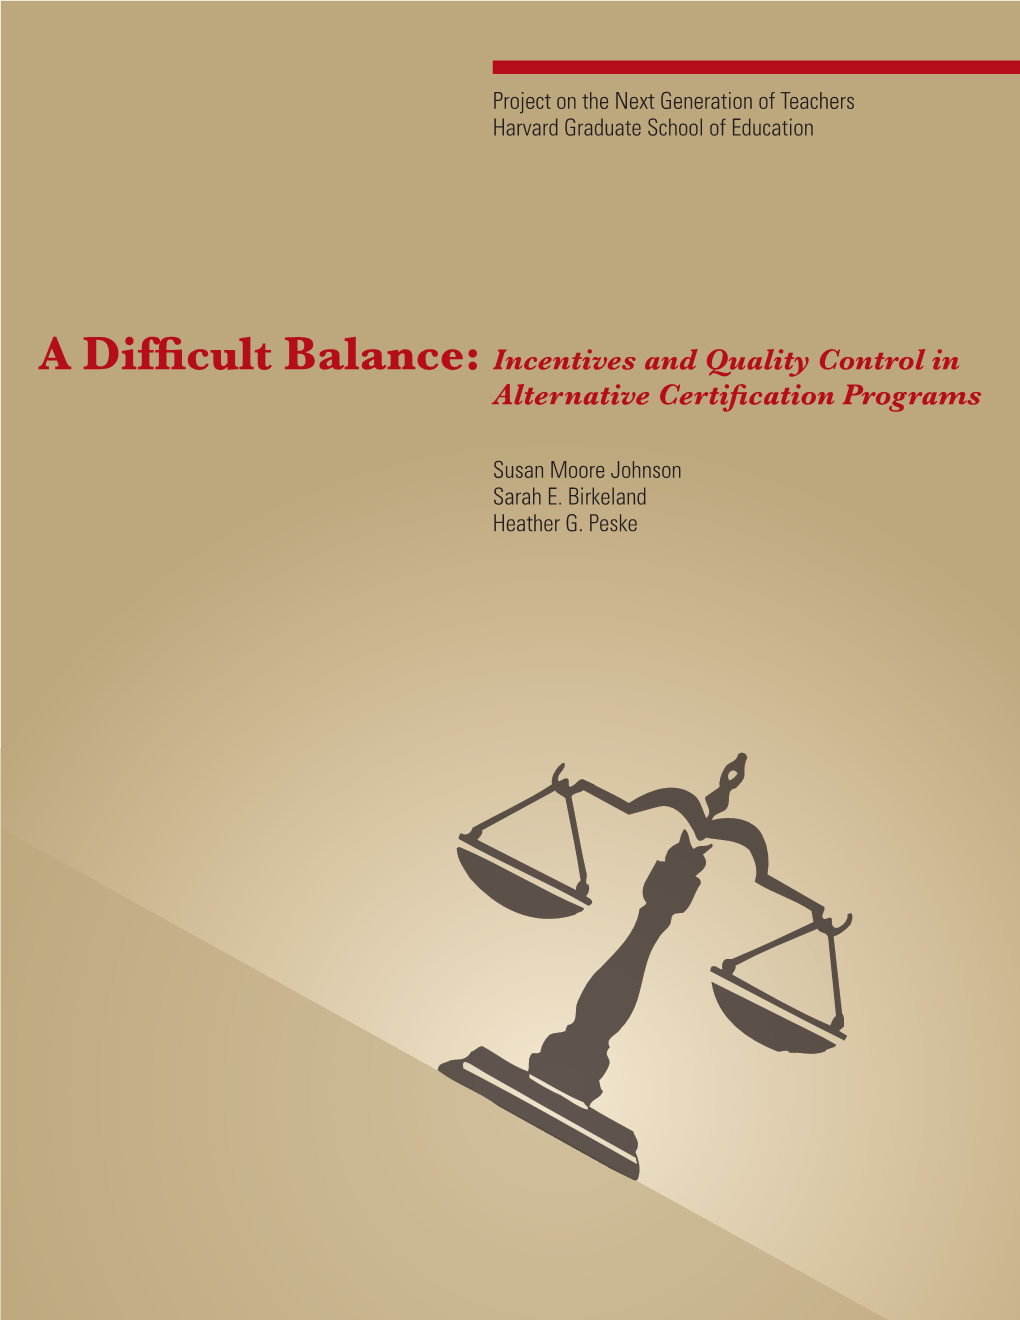 A Difficult Balance: Incentives and Quality Control in Alternative